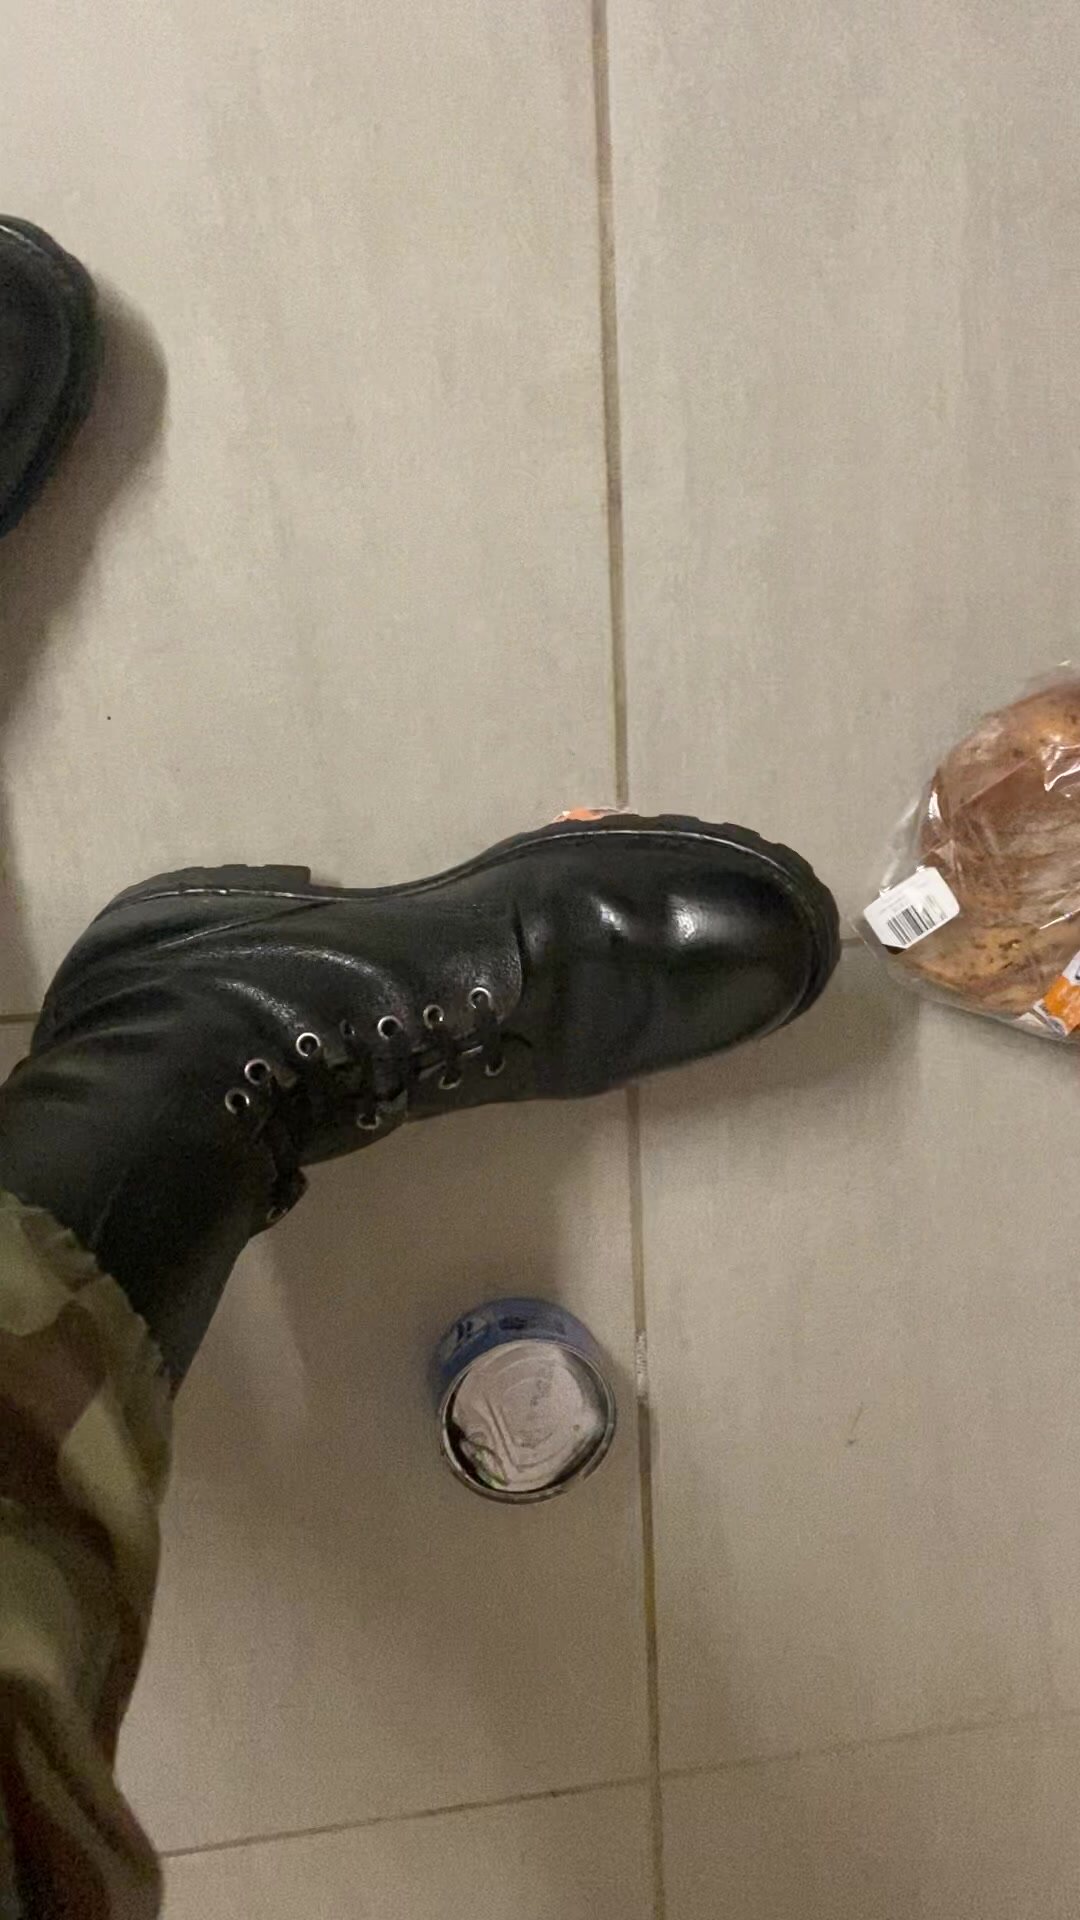 ARMY BOOTS CRUSH FOOD